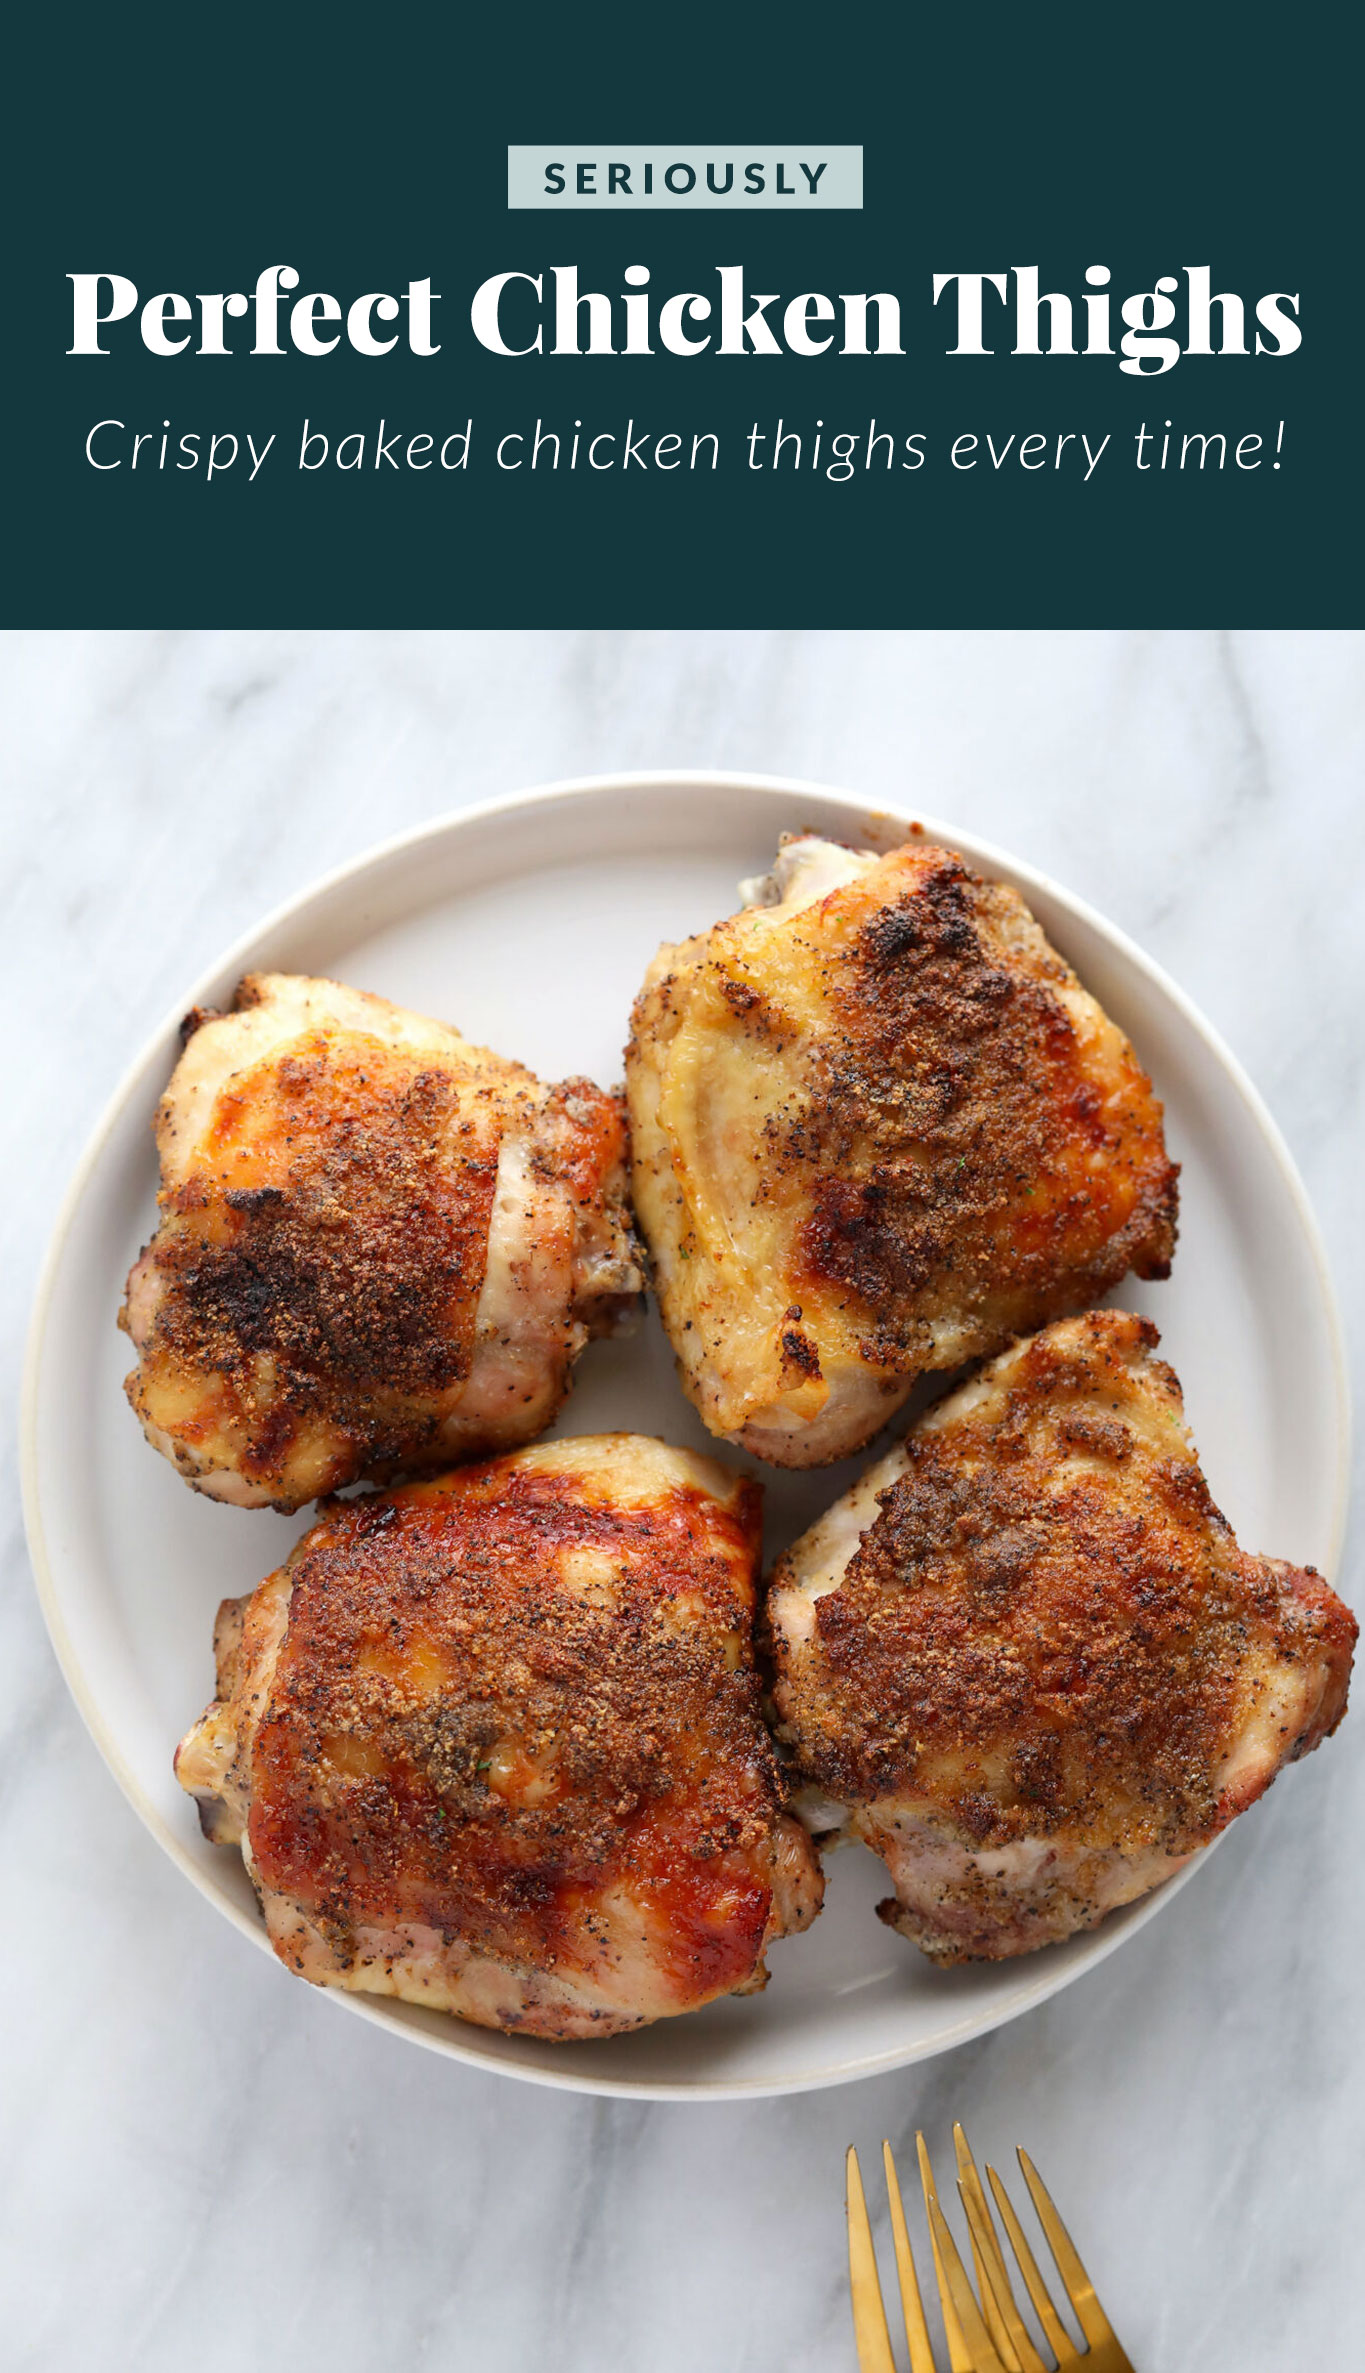 Crispy Baked Chicken Thighs - Fit Foodie Finds